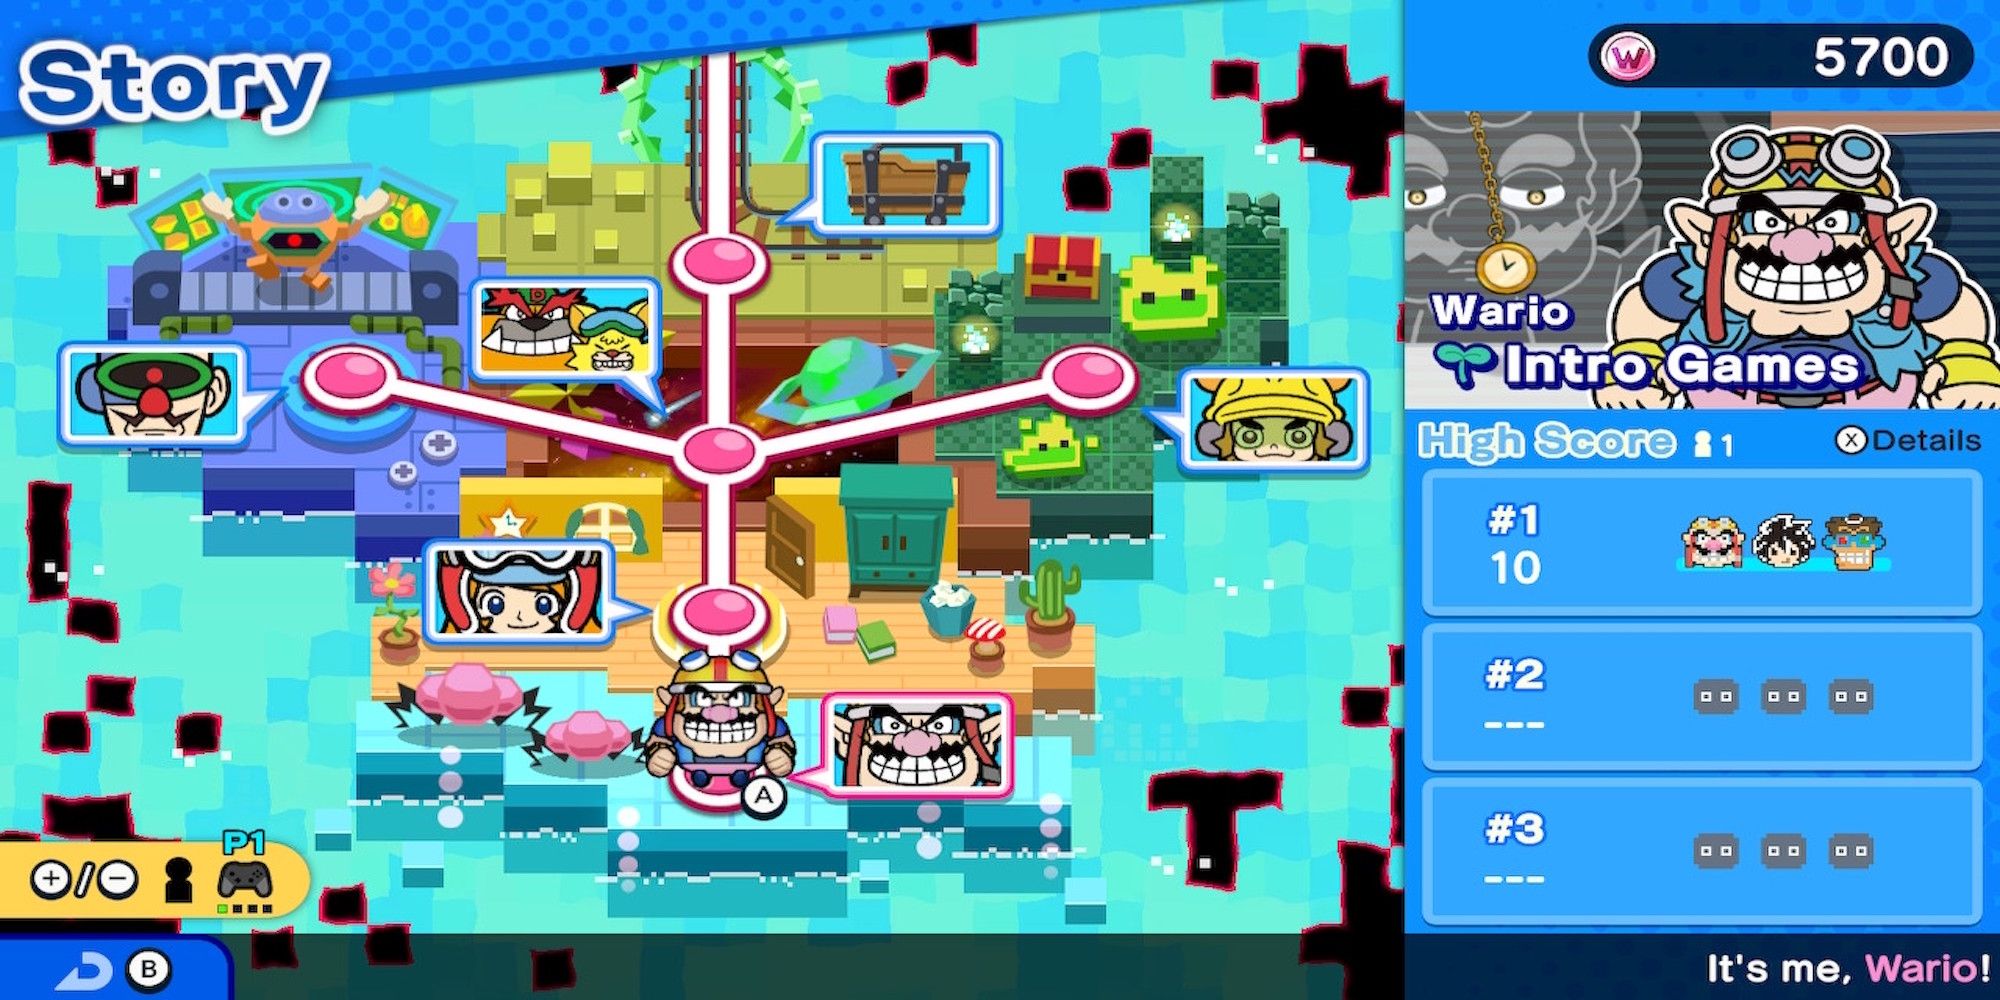 The world map from WarioWare: Get It Together